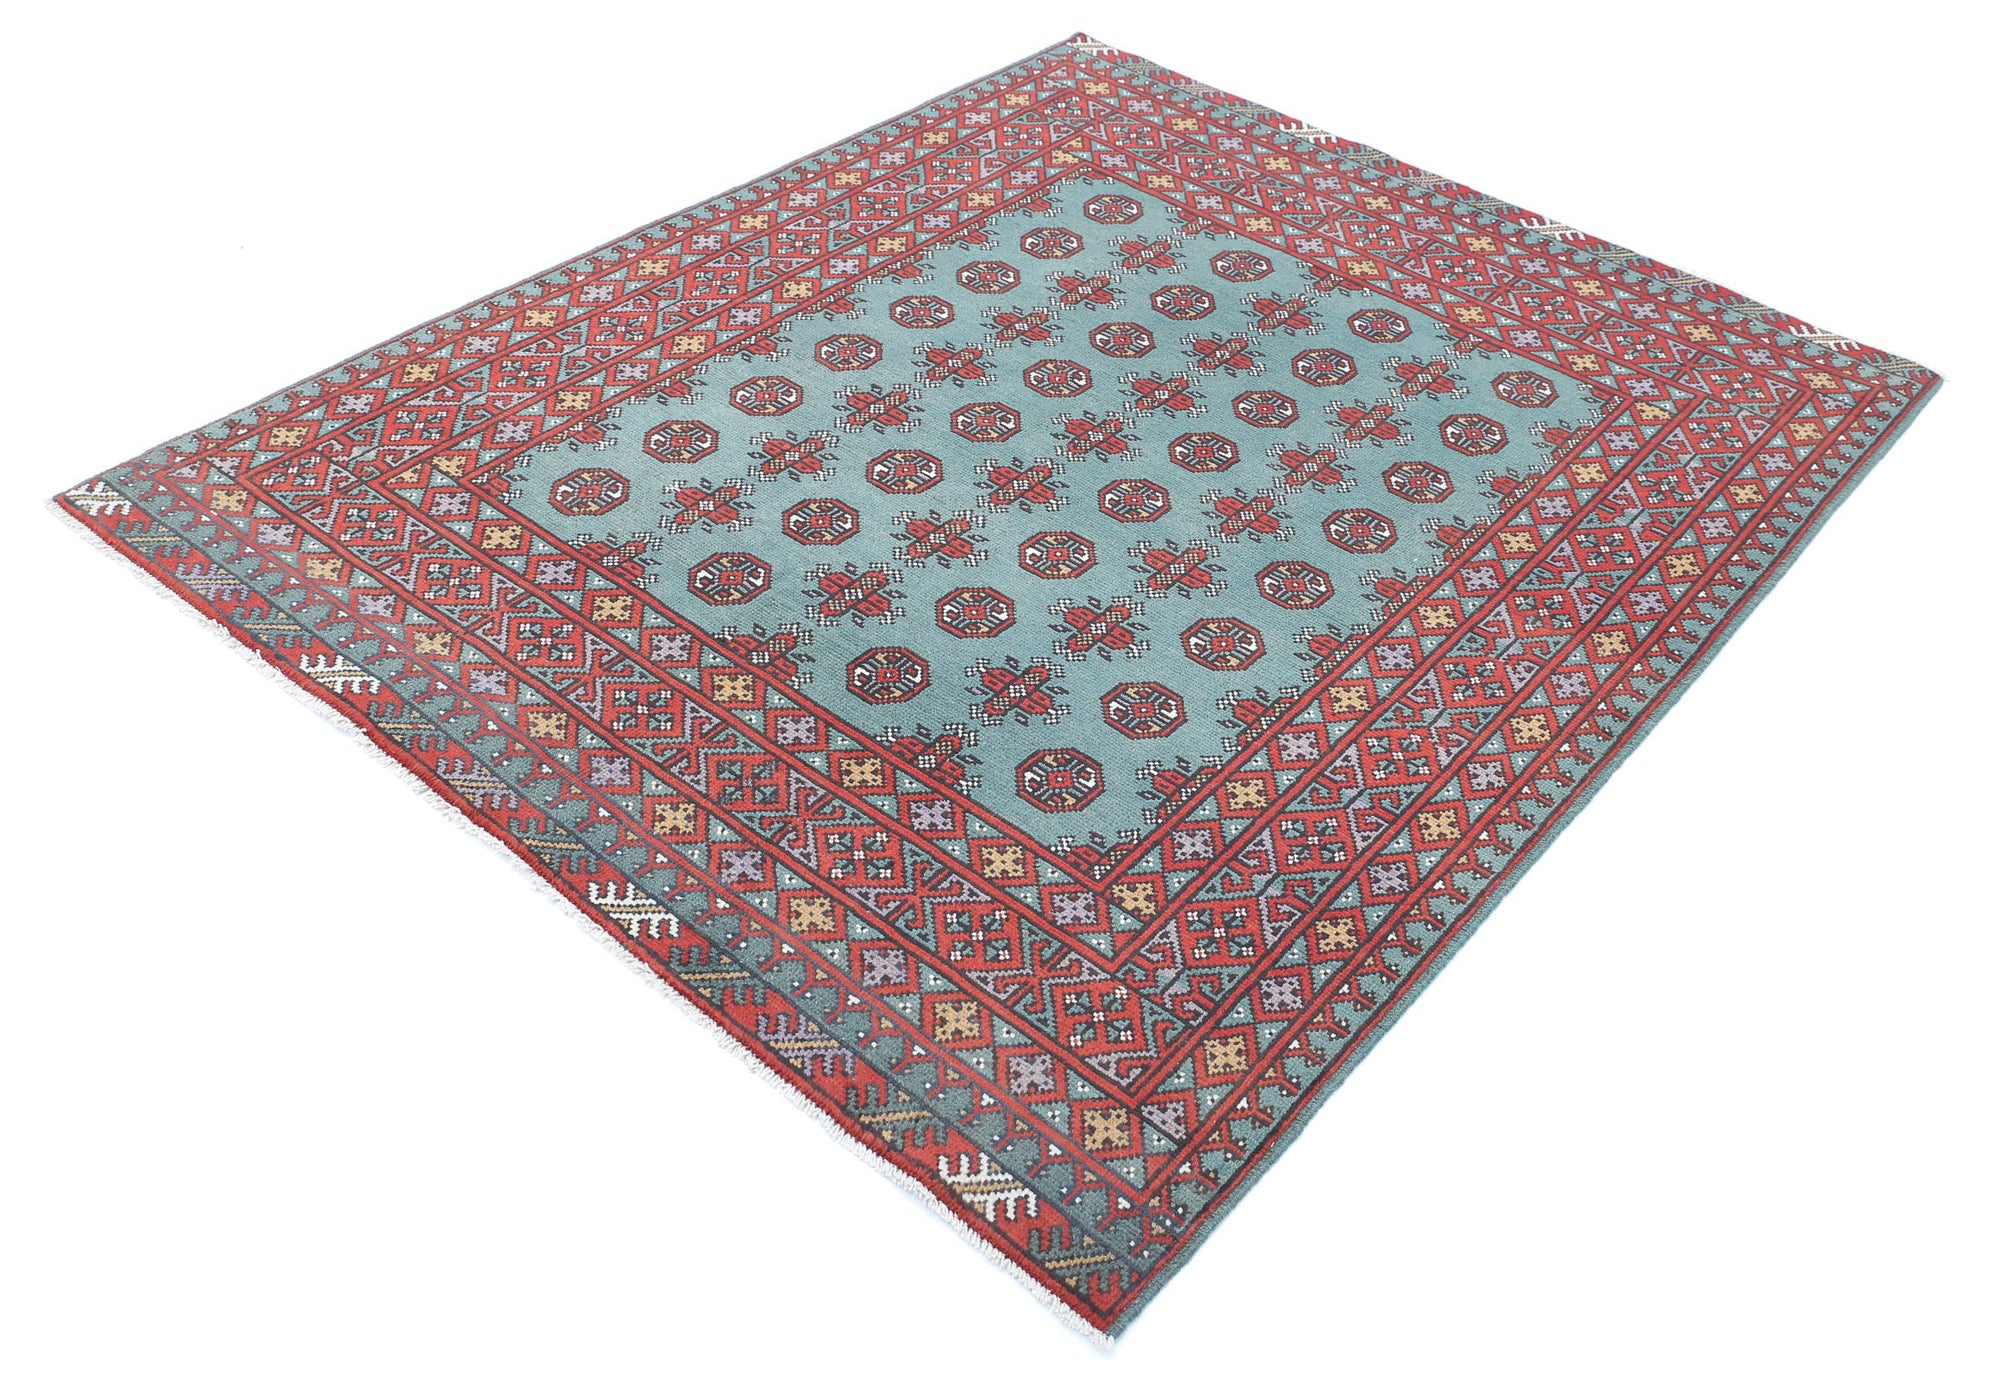 Revival-hand-knotted-gul-collection-wool-rug-5013927-2.jpg